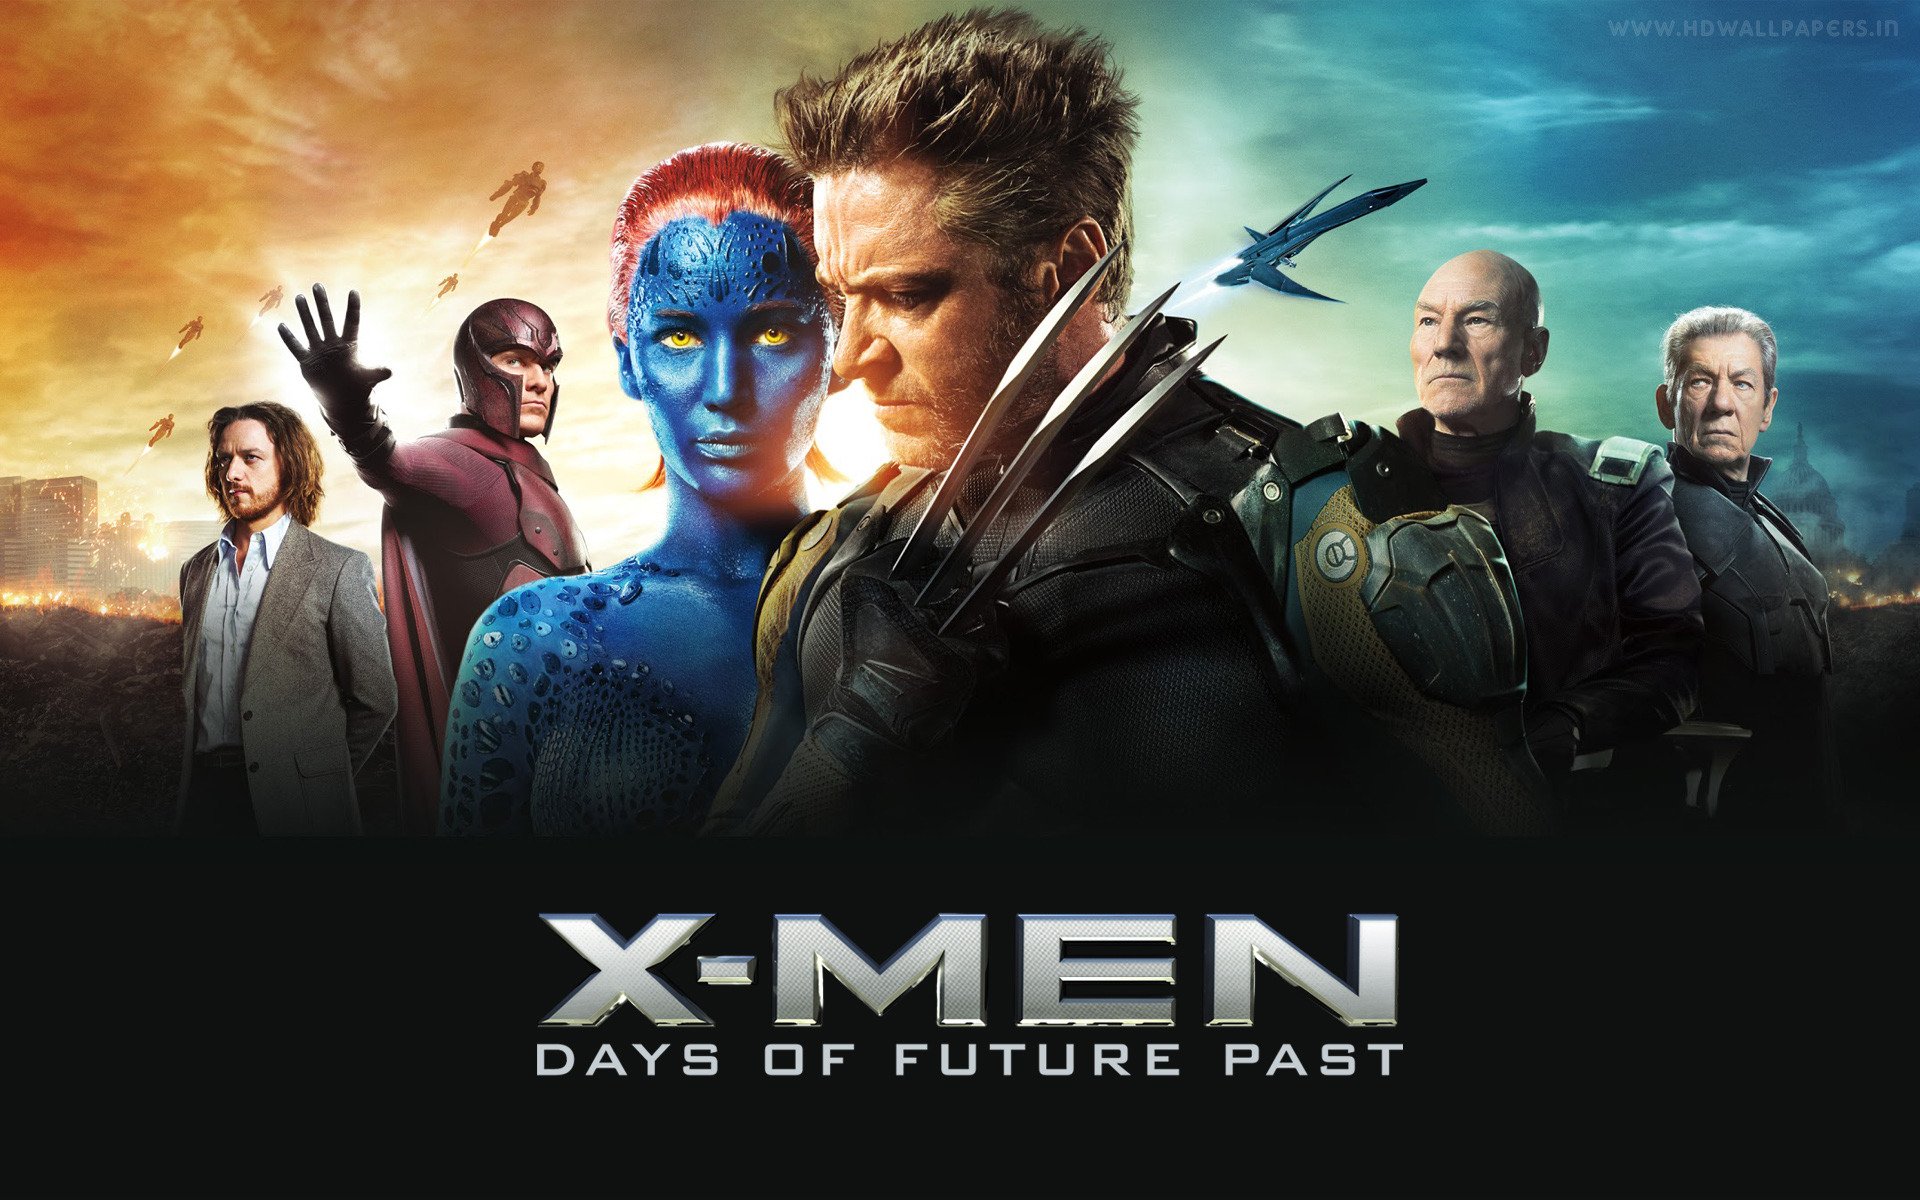 Can You Remember X-Men: Days of Future Past?